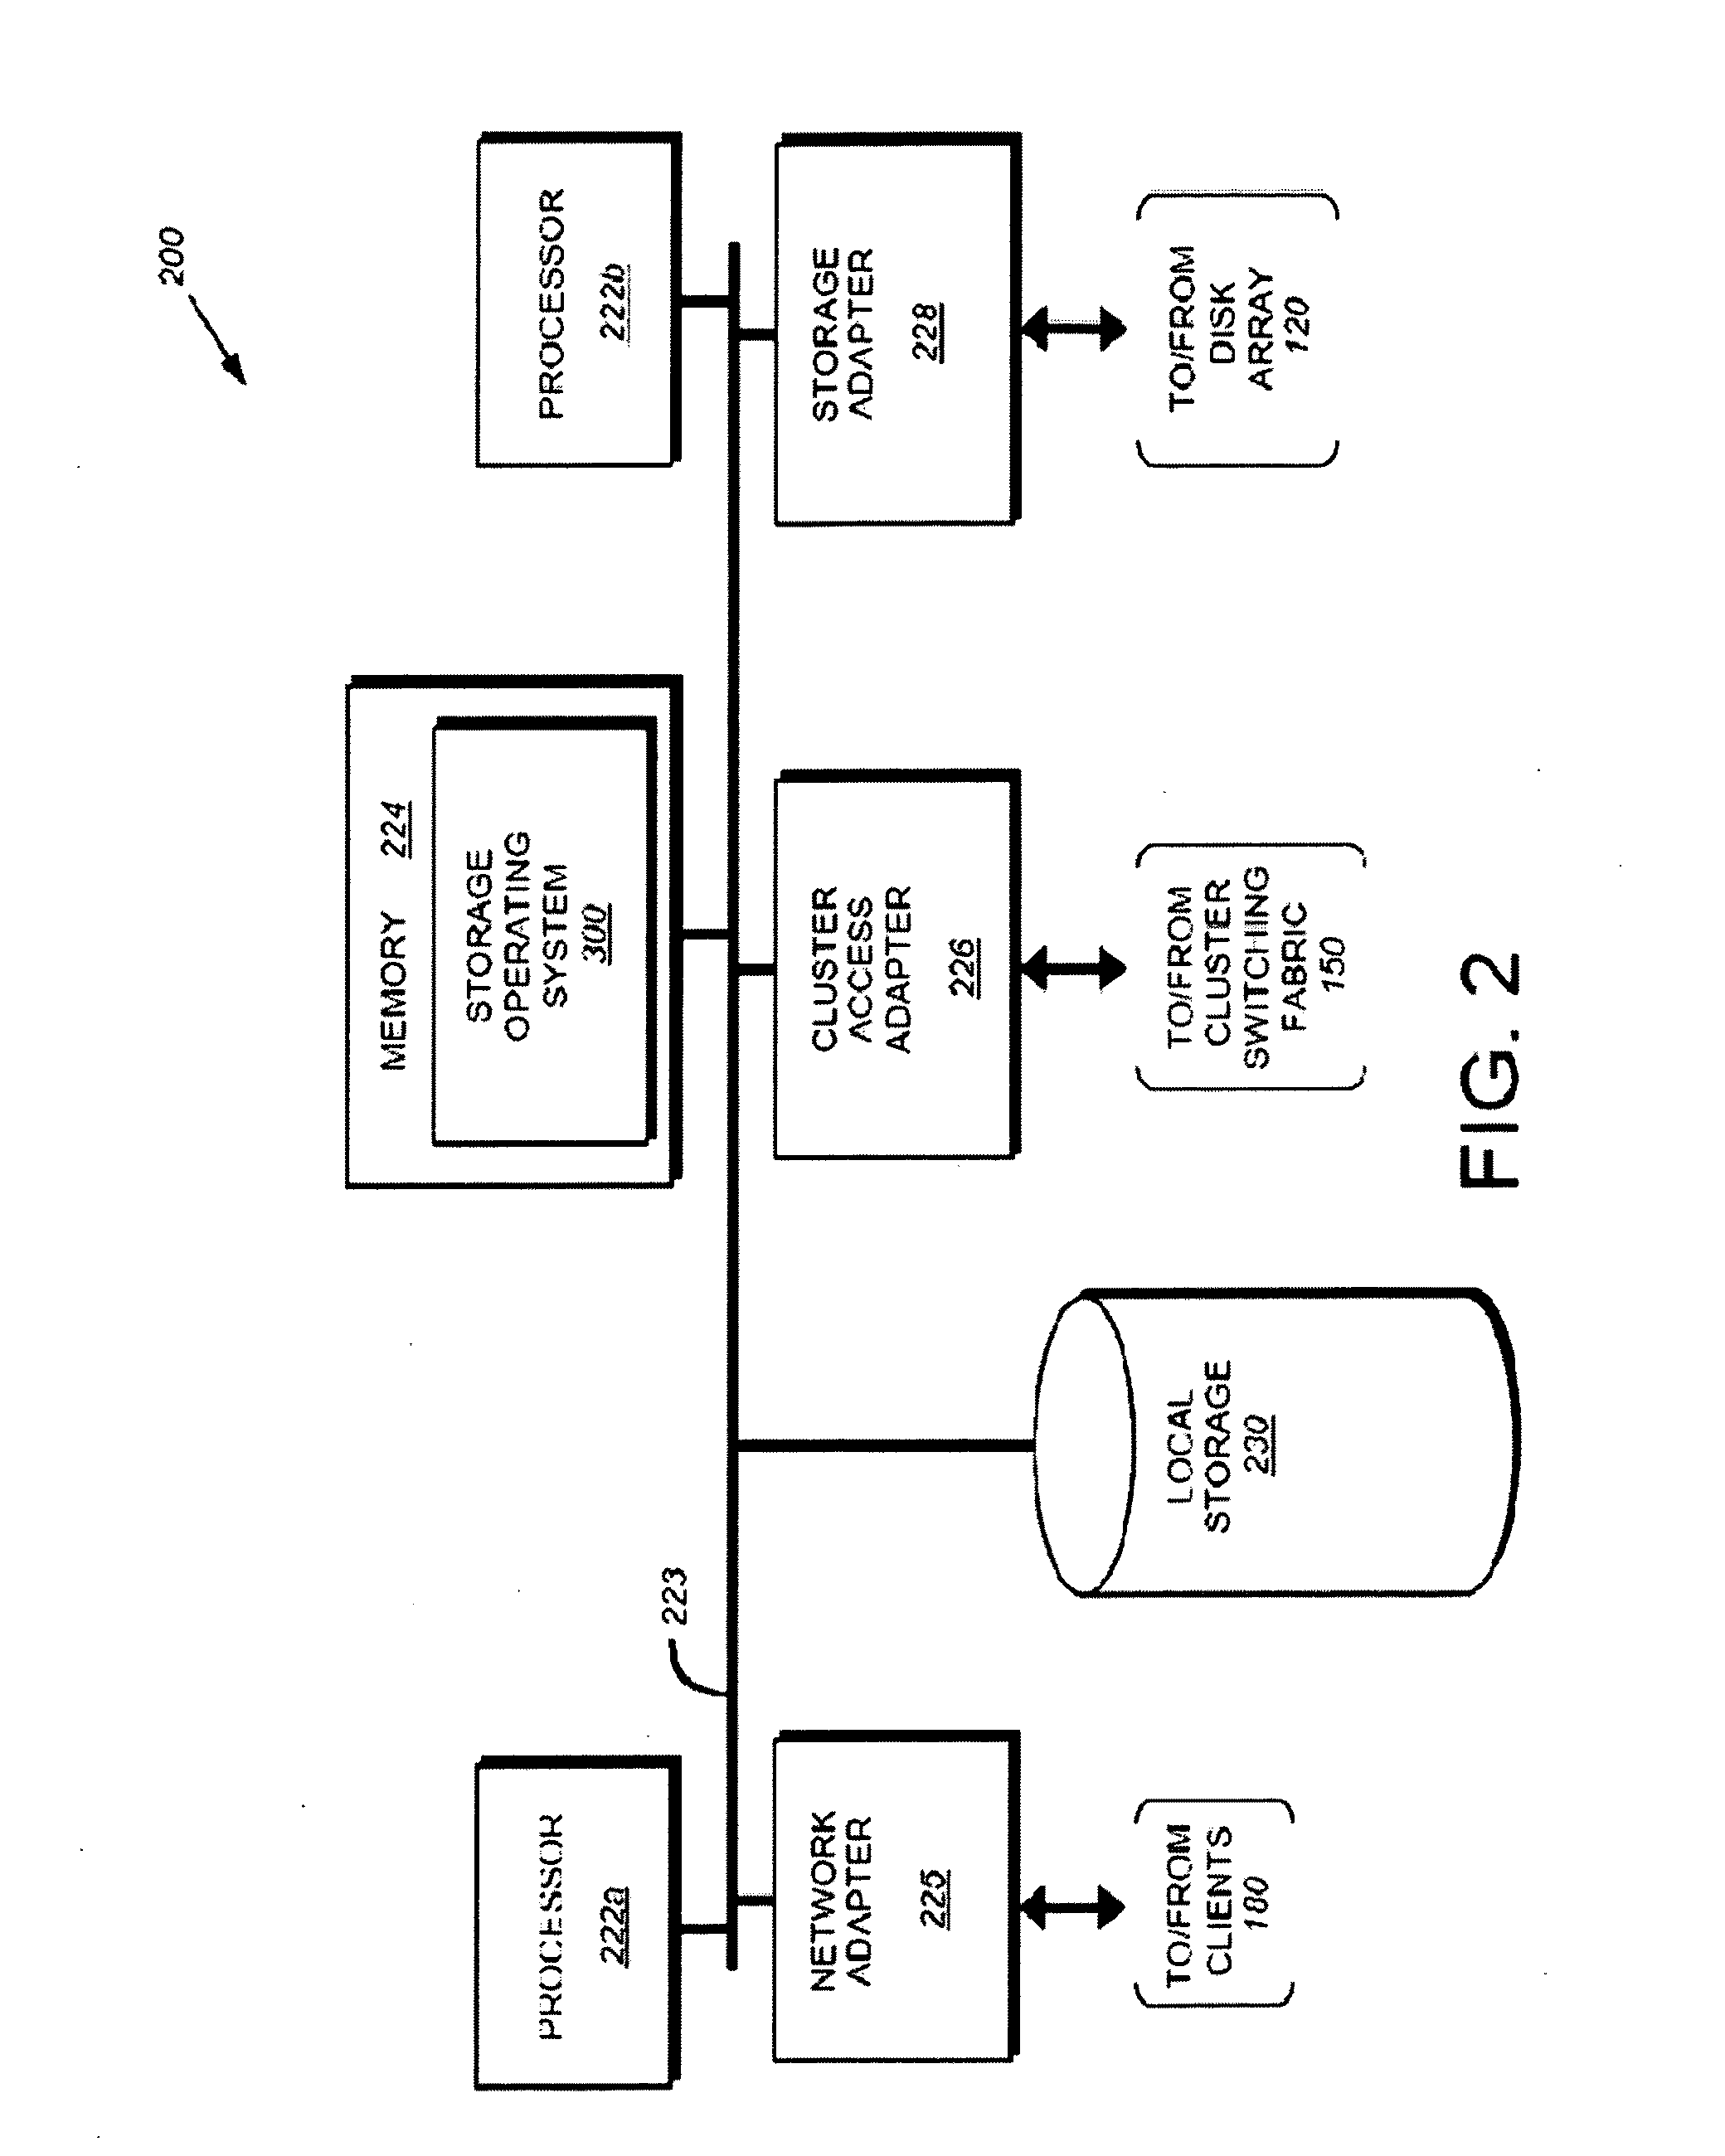 Servicing of Network Software Components of Nodes of a Cluster Storage System